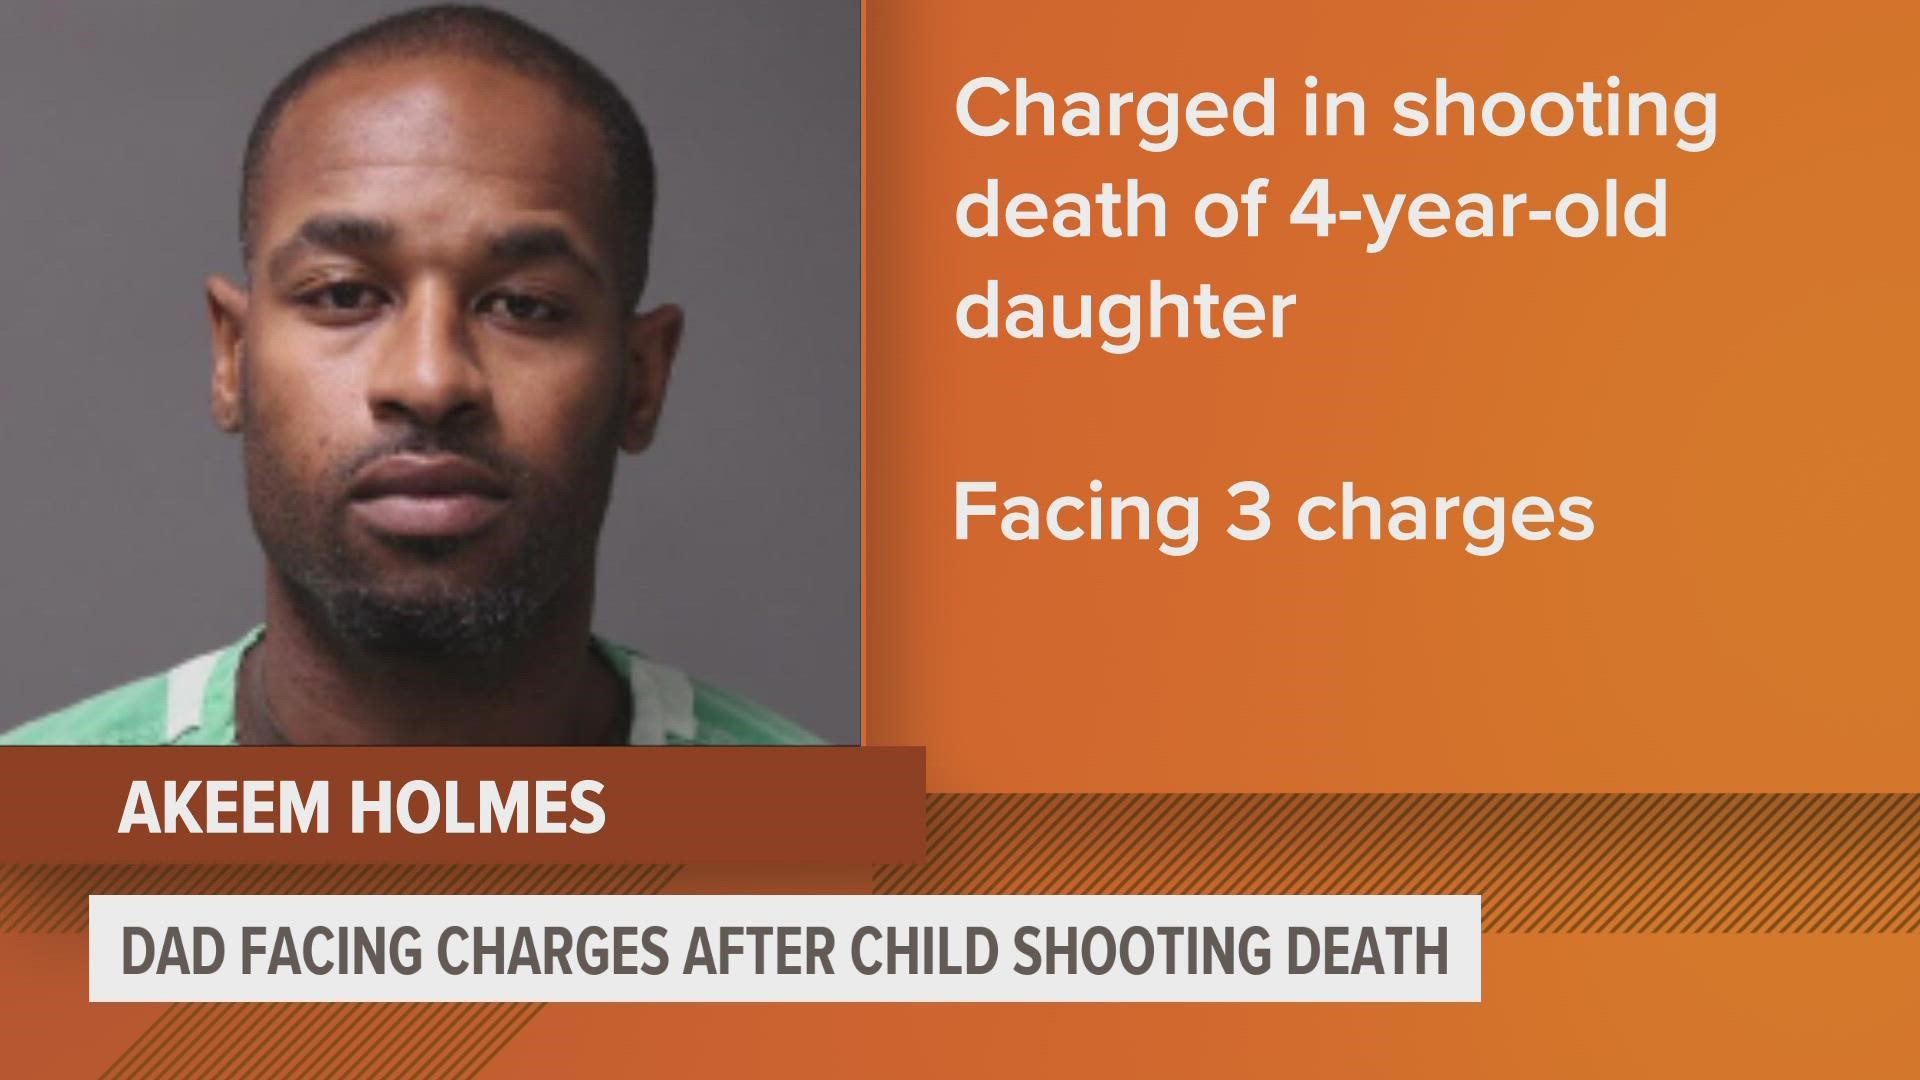 Akeem Holmes is charged with Involuntary Manslaughter, Neglect or Abandonment of a Dependent Person and Making Firearms Available to a Minor.